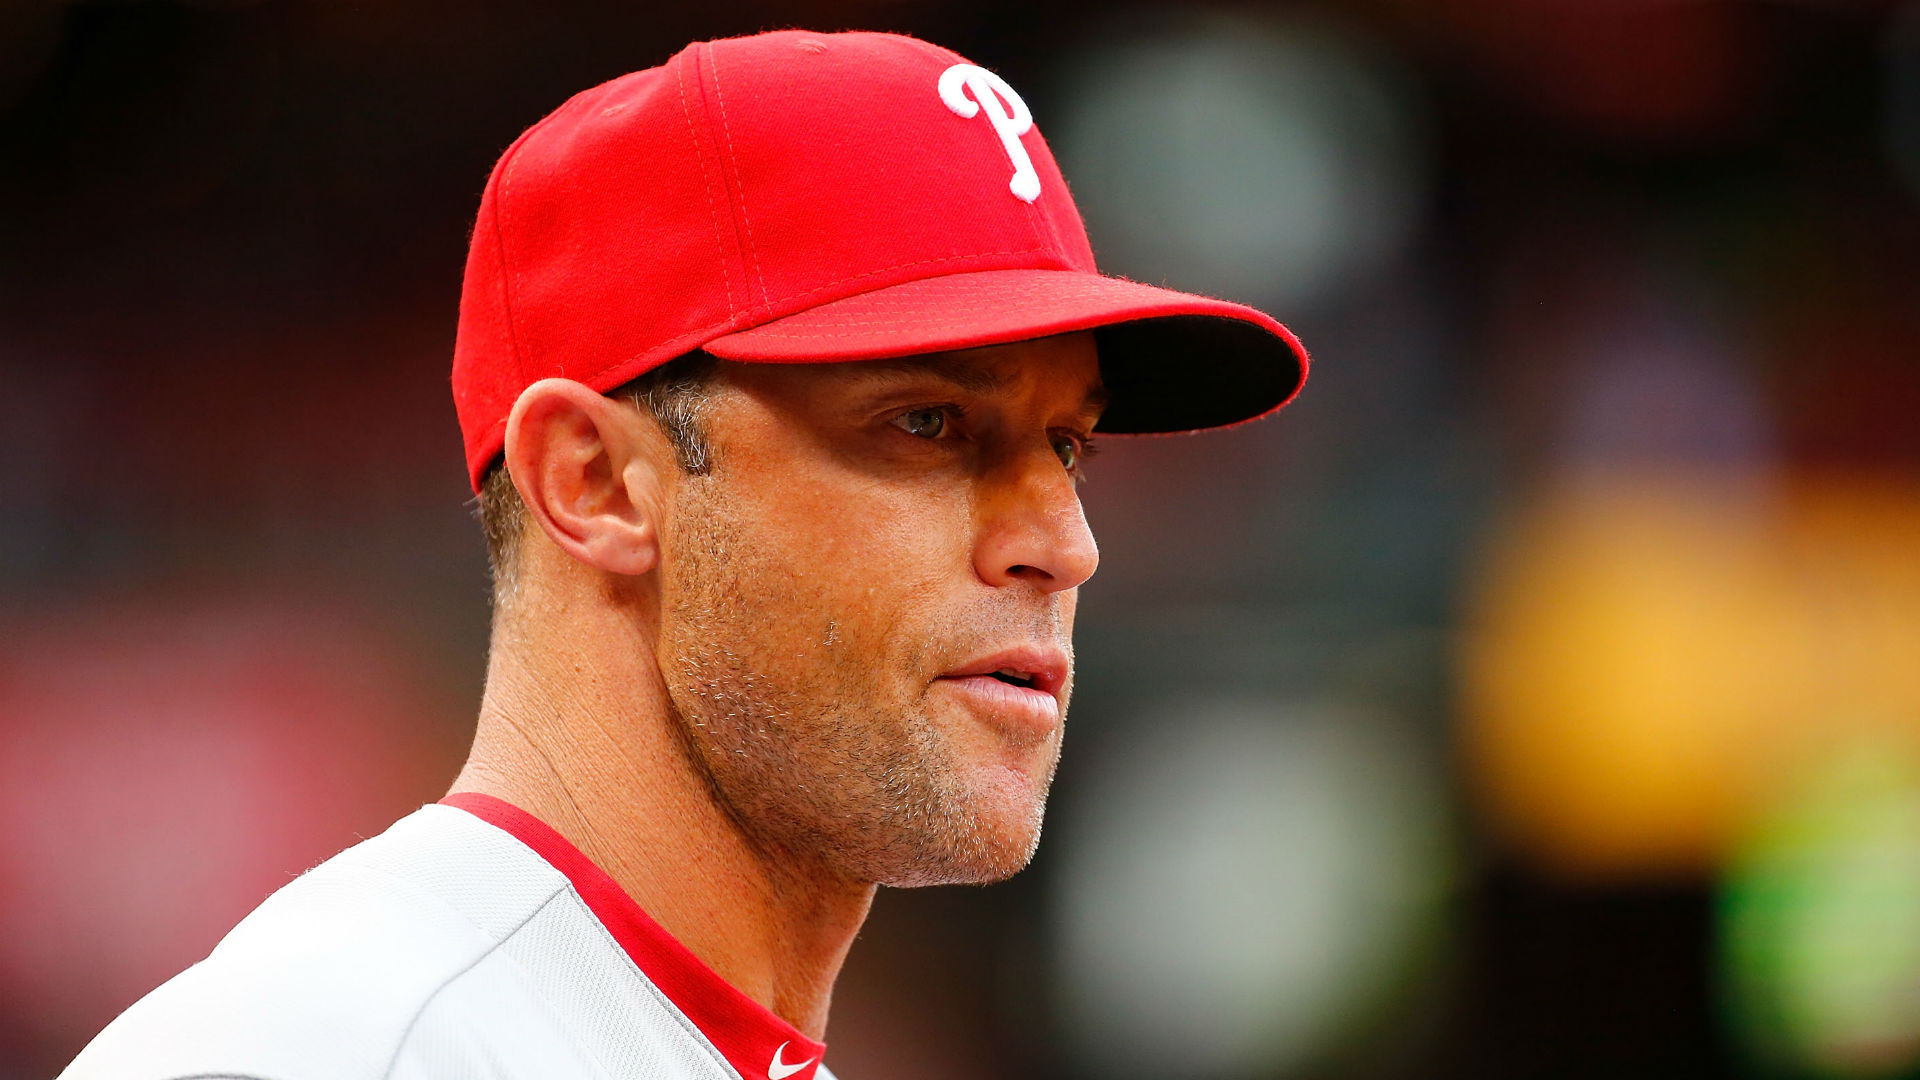 Phillies GM Matt Klentak said the team doesn't have any plans to change their staff amid their slump, including manager Gabe Kapler.